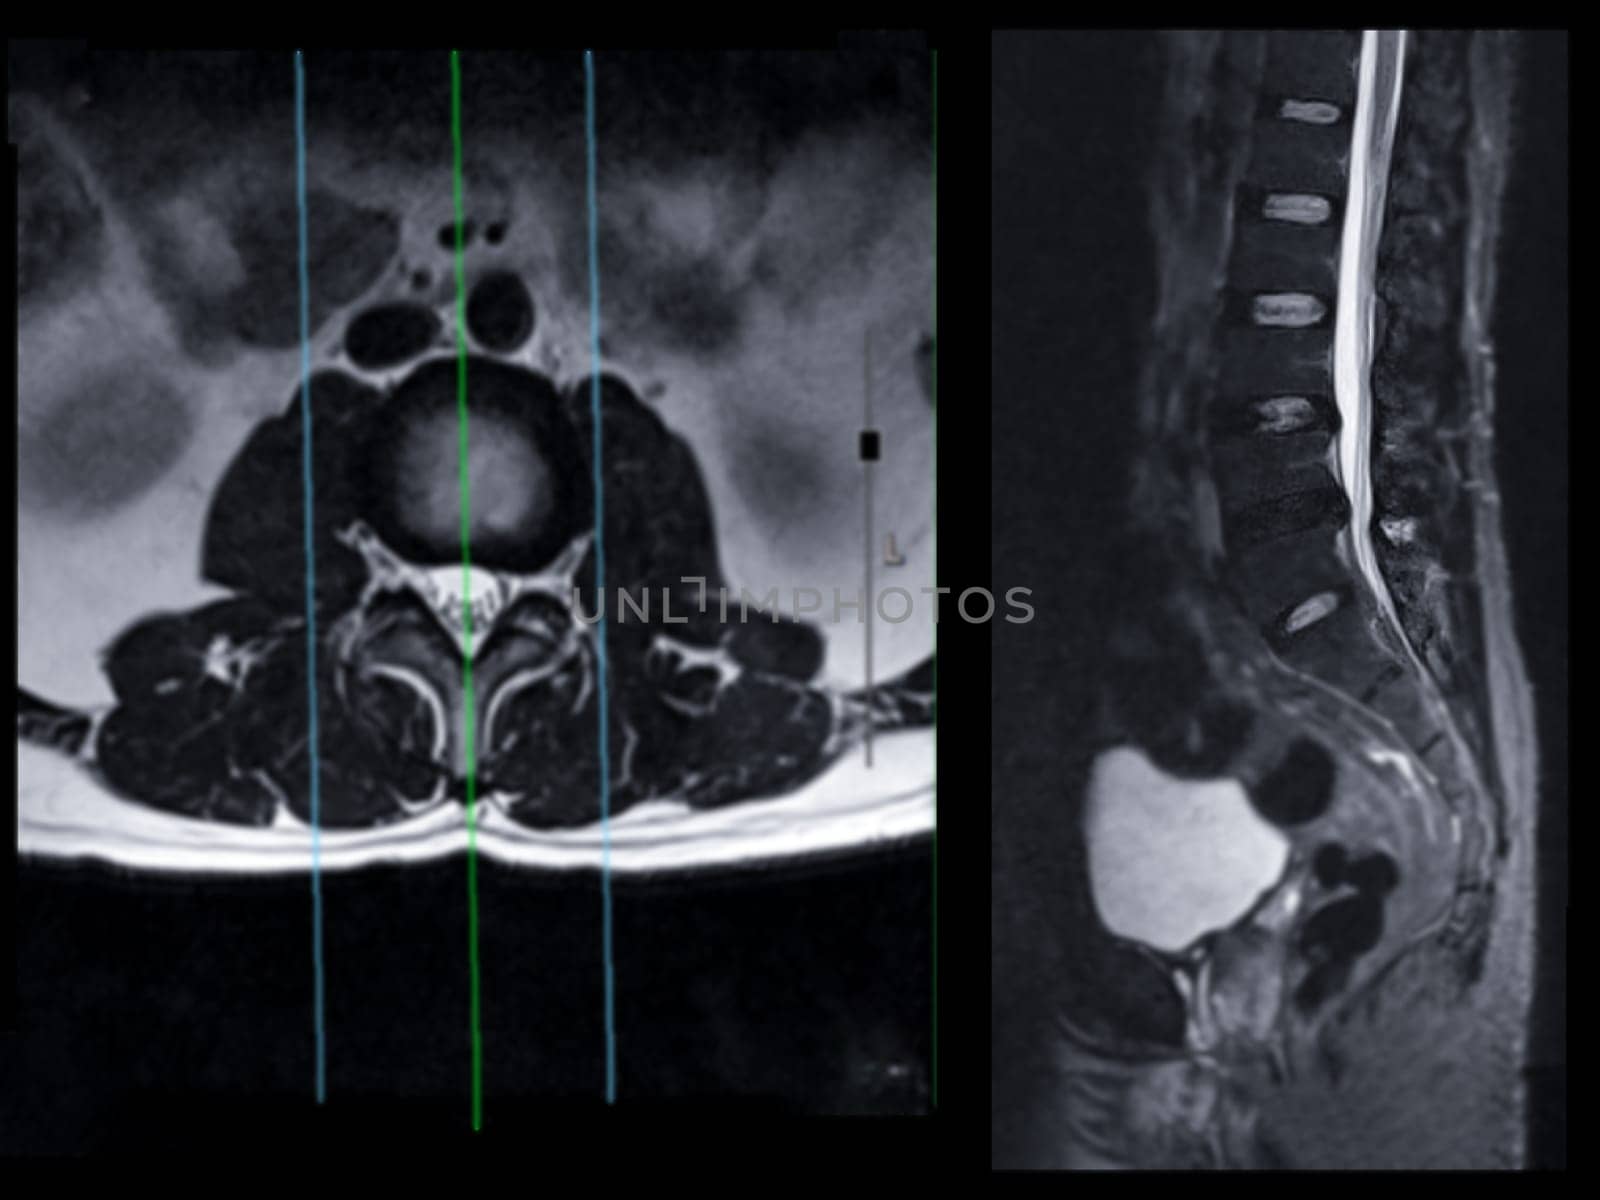 MRI L-S spine or lumbar spine Axial T2W view with sagittal plane for diagnosis spinal cord compression. by samunella